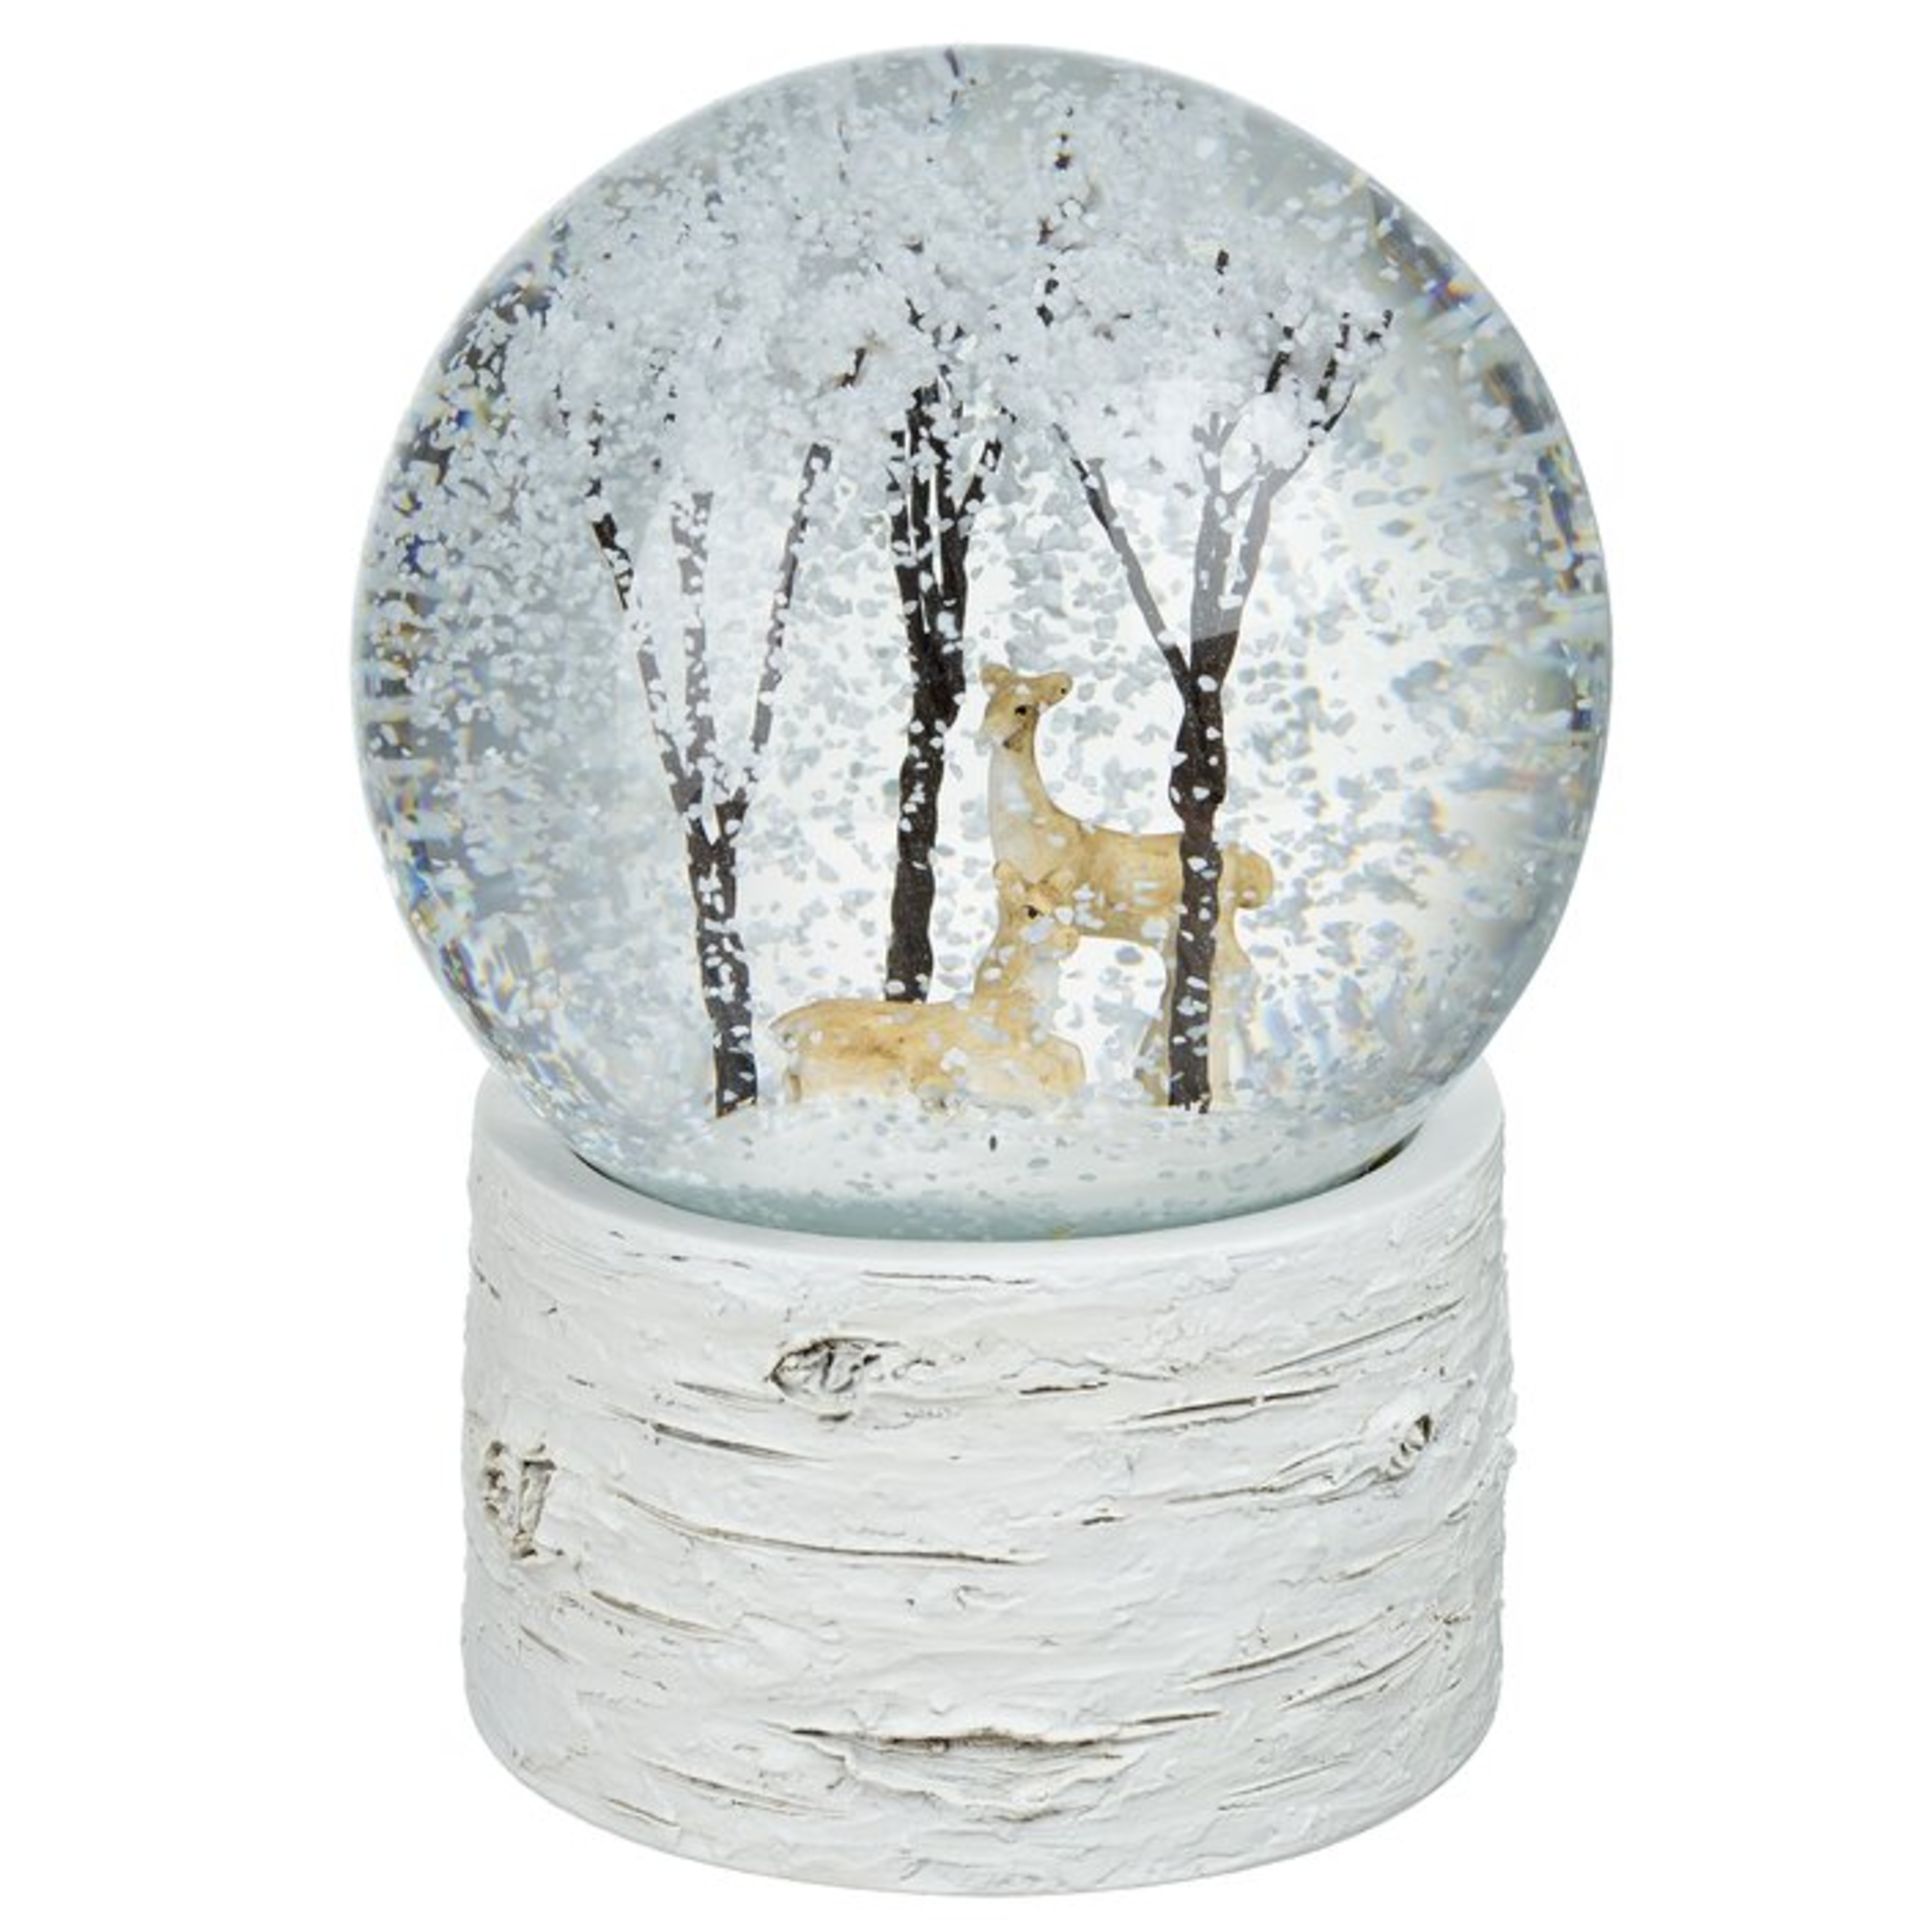 Deer and Trees Musical Snow Globe with Birch Base - RRP £30.99